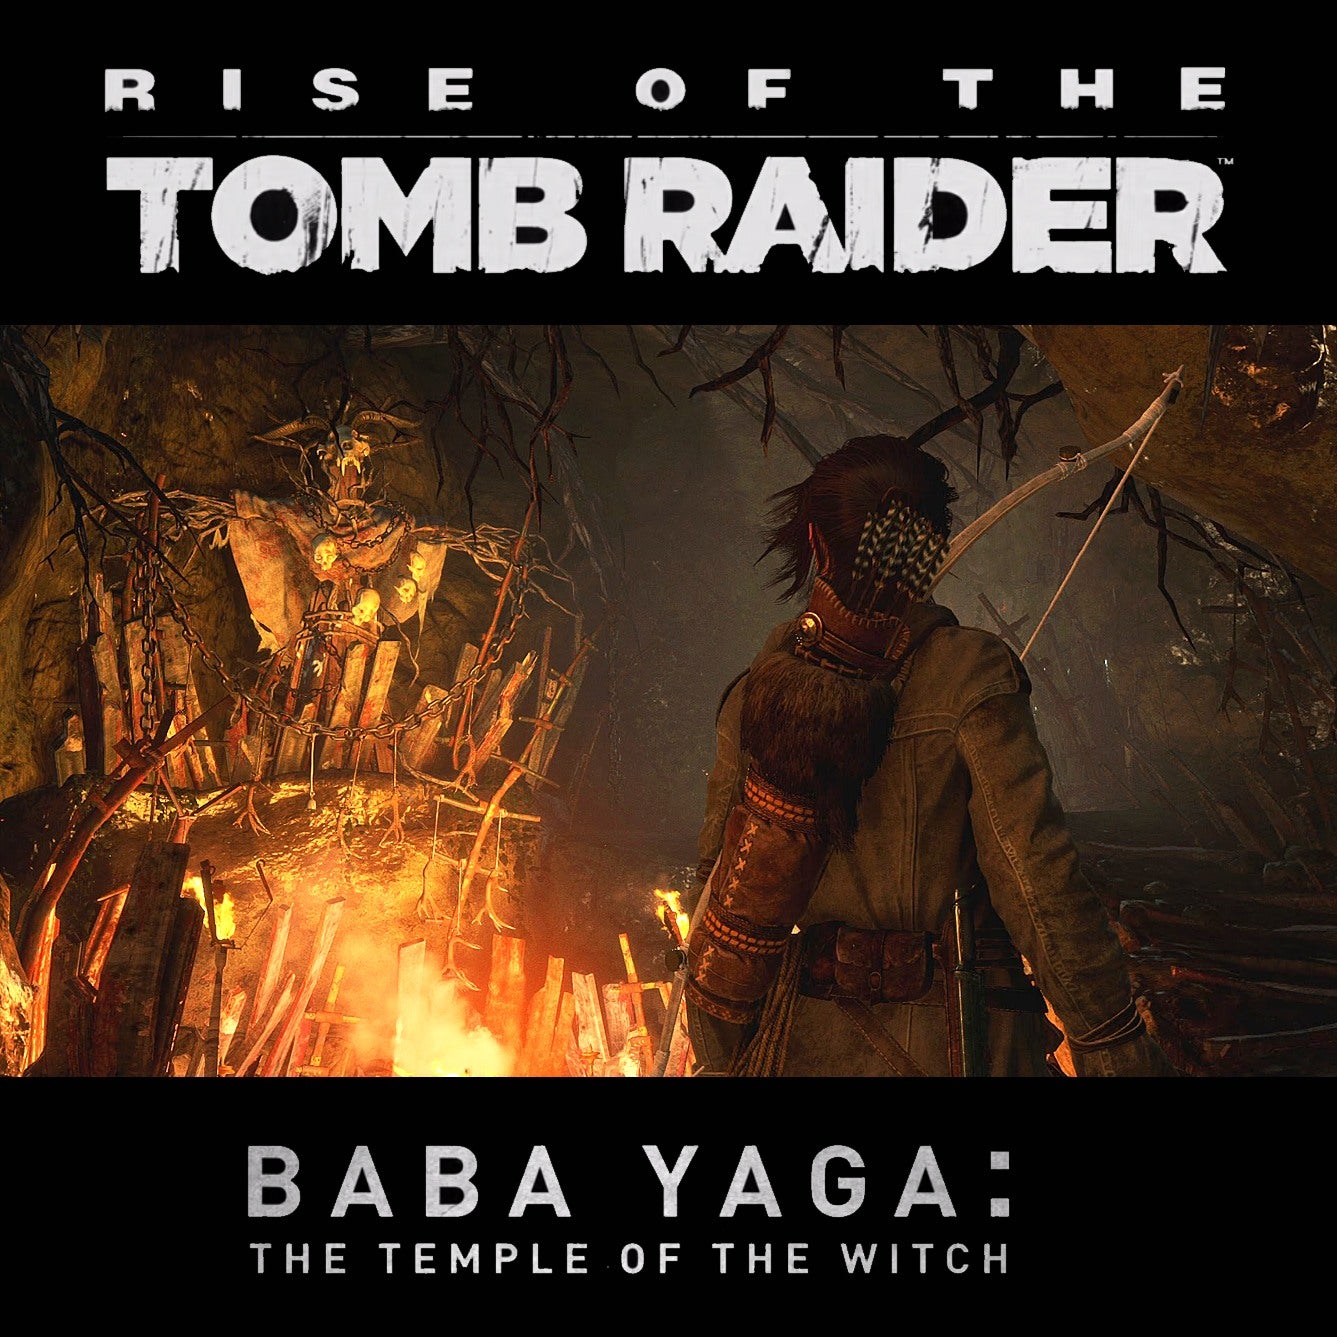 Rise of the Tomb Raider — Baba Yaga: The Temple of the Witch